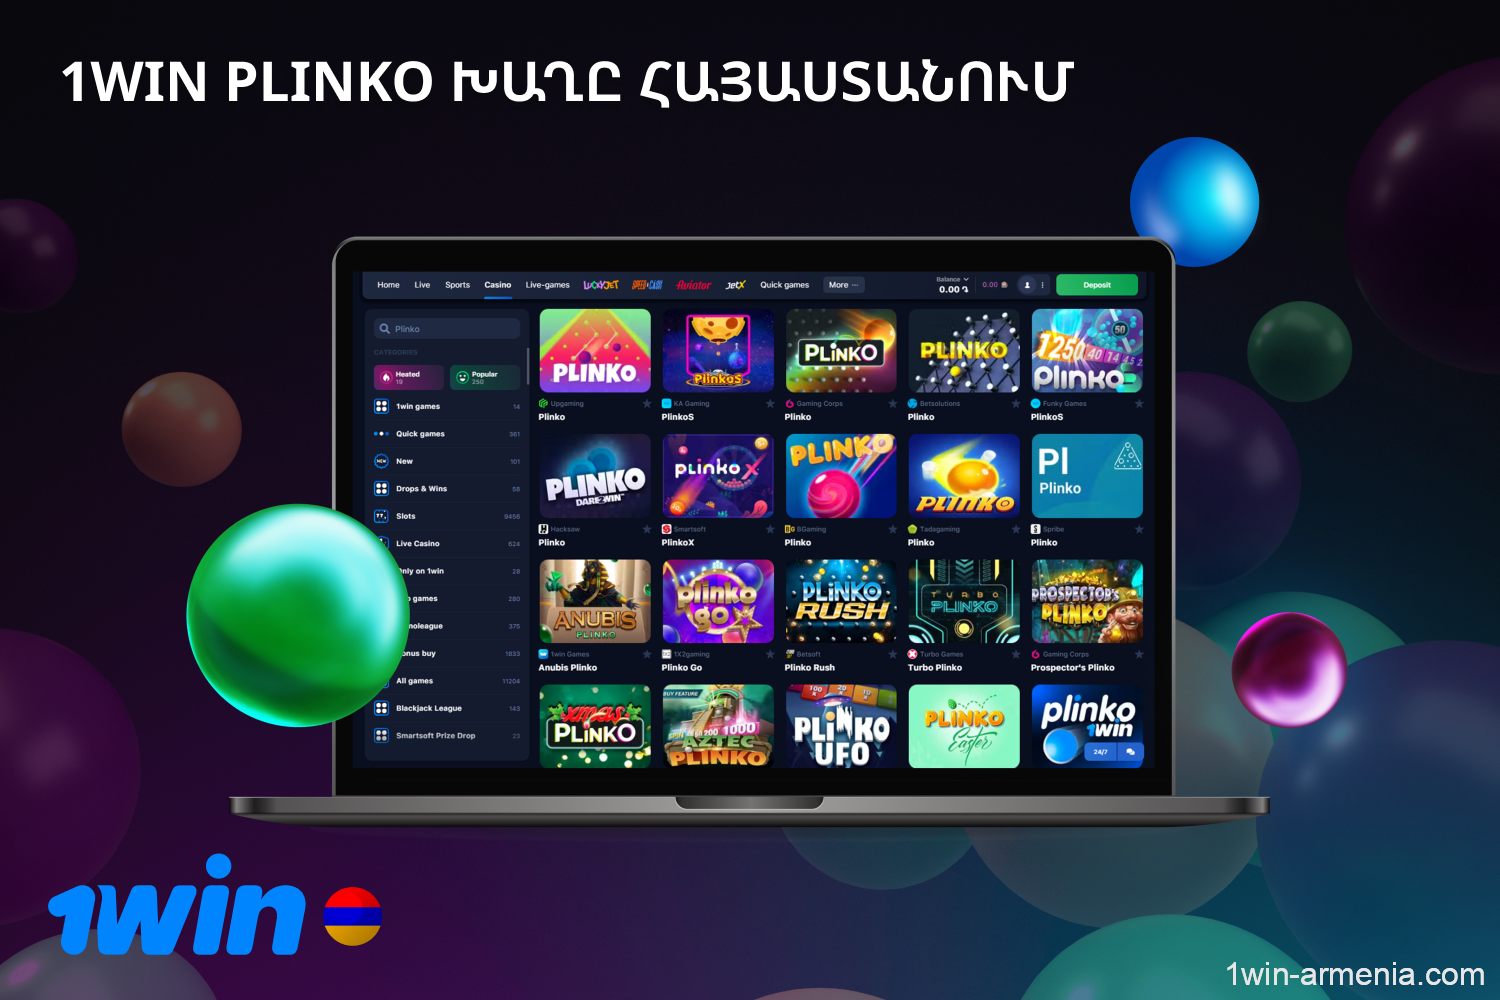 1win Plinko offers clear rules and frequent payouts and is popular among Armenian players